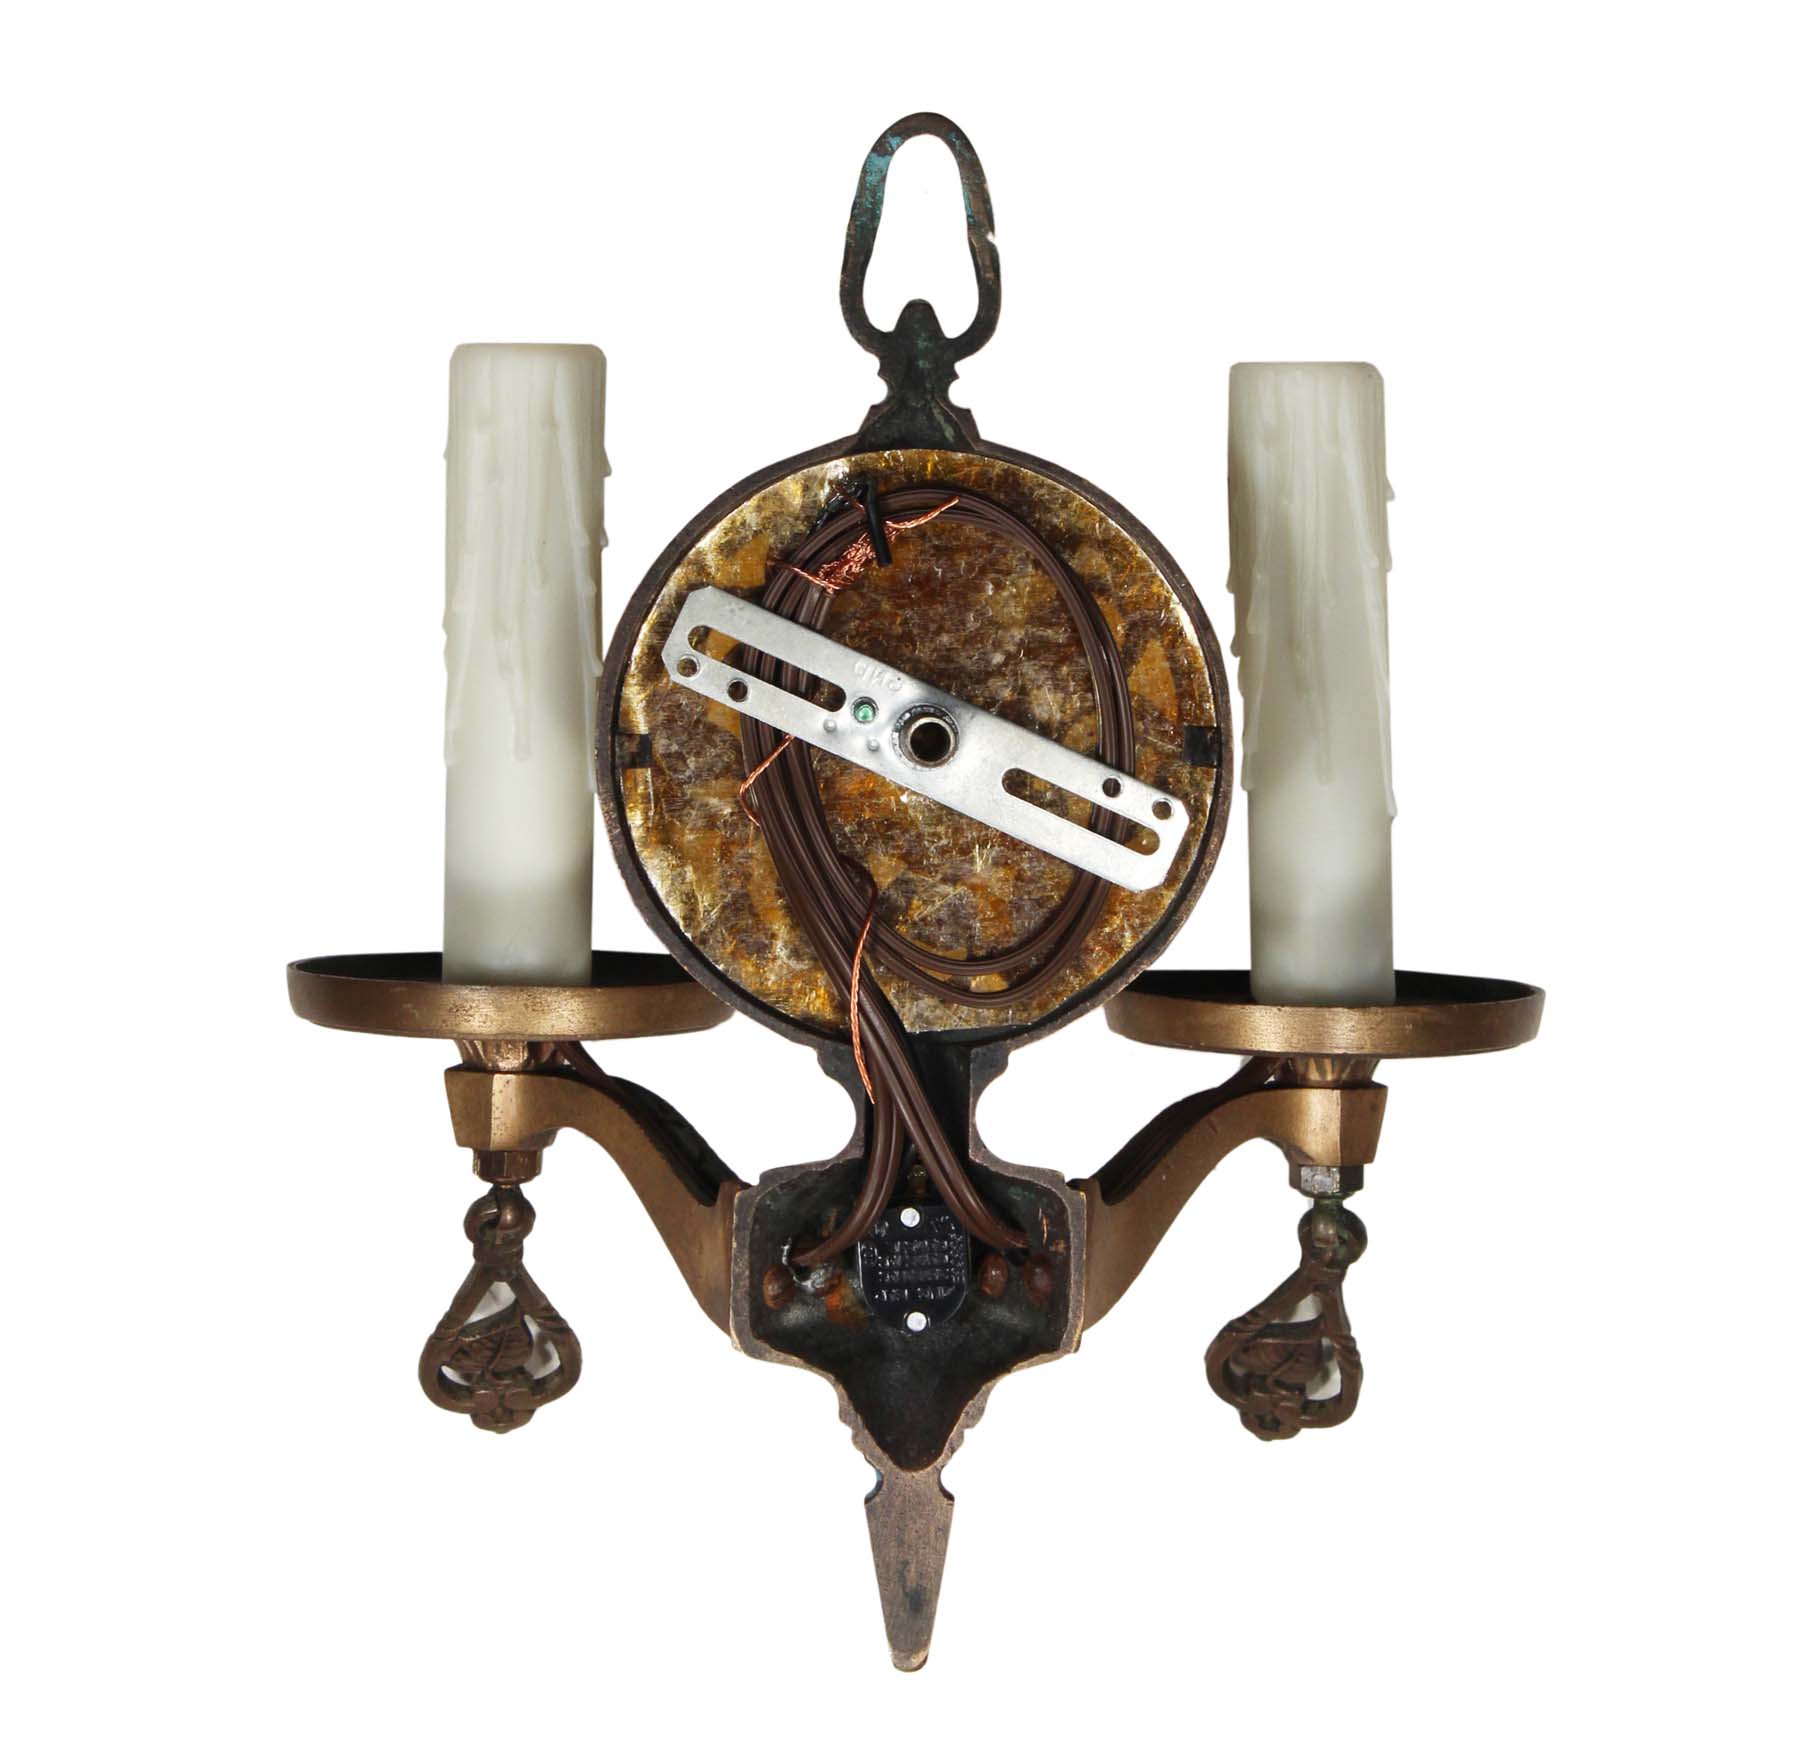 SOLD Matching Antique Cast Bronze Sconces with Mica, c. 1920s -68561